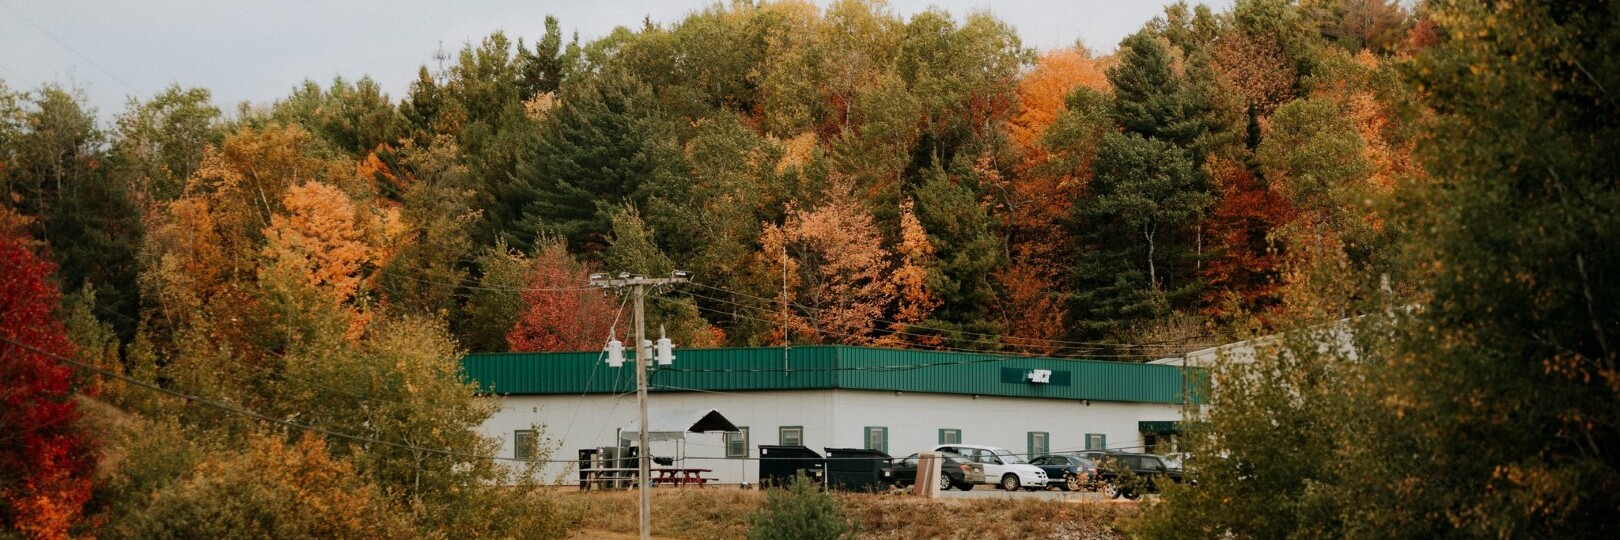 Photo of RCT headquarters in Lyndonville, Vermont